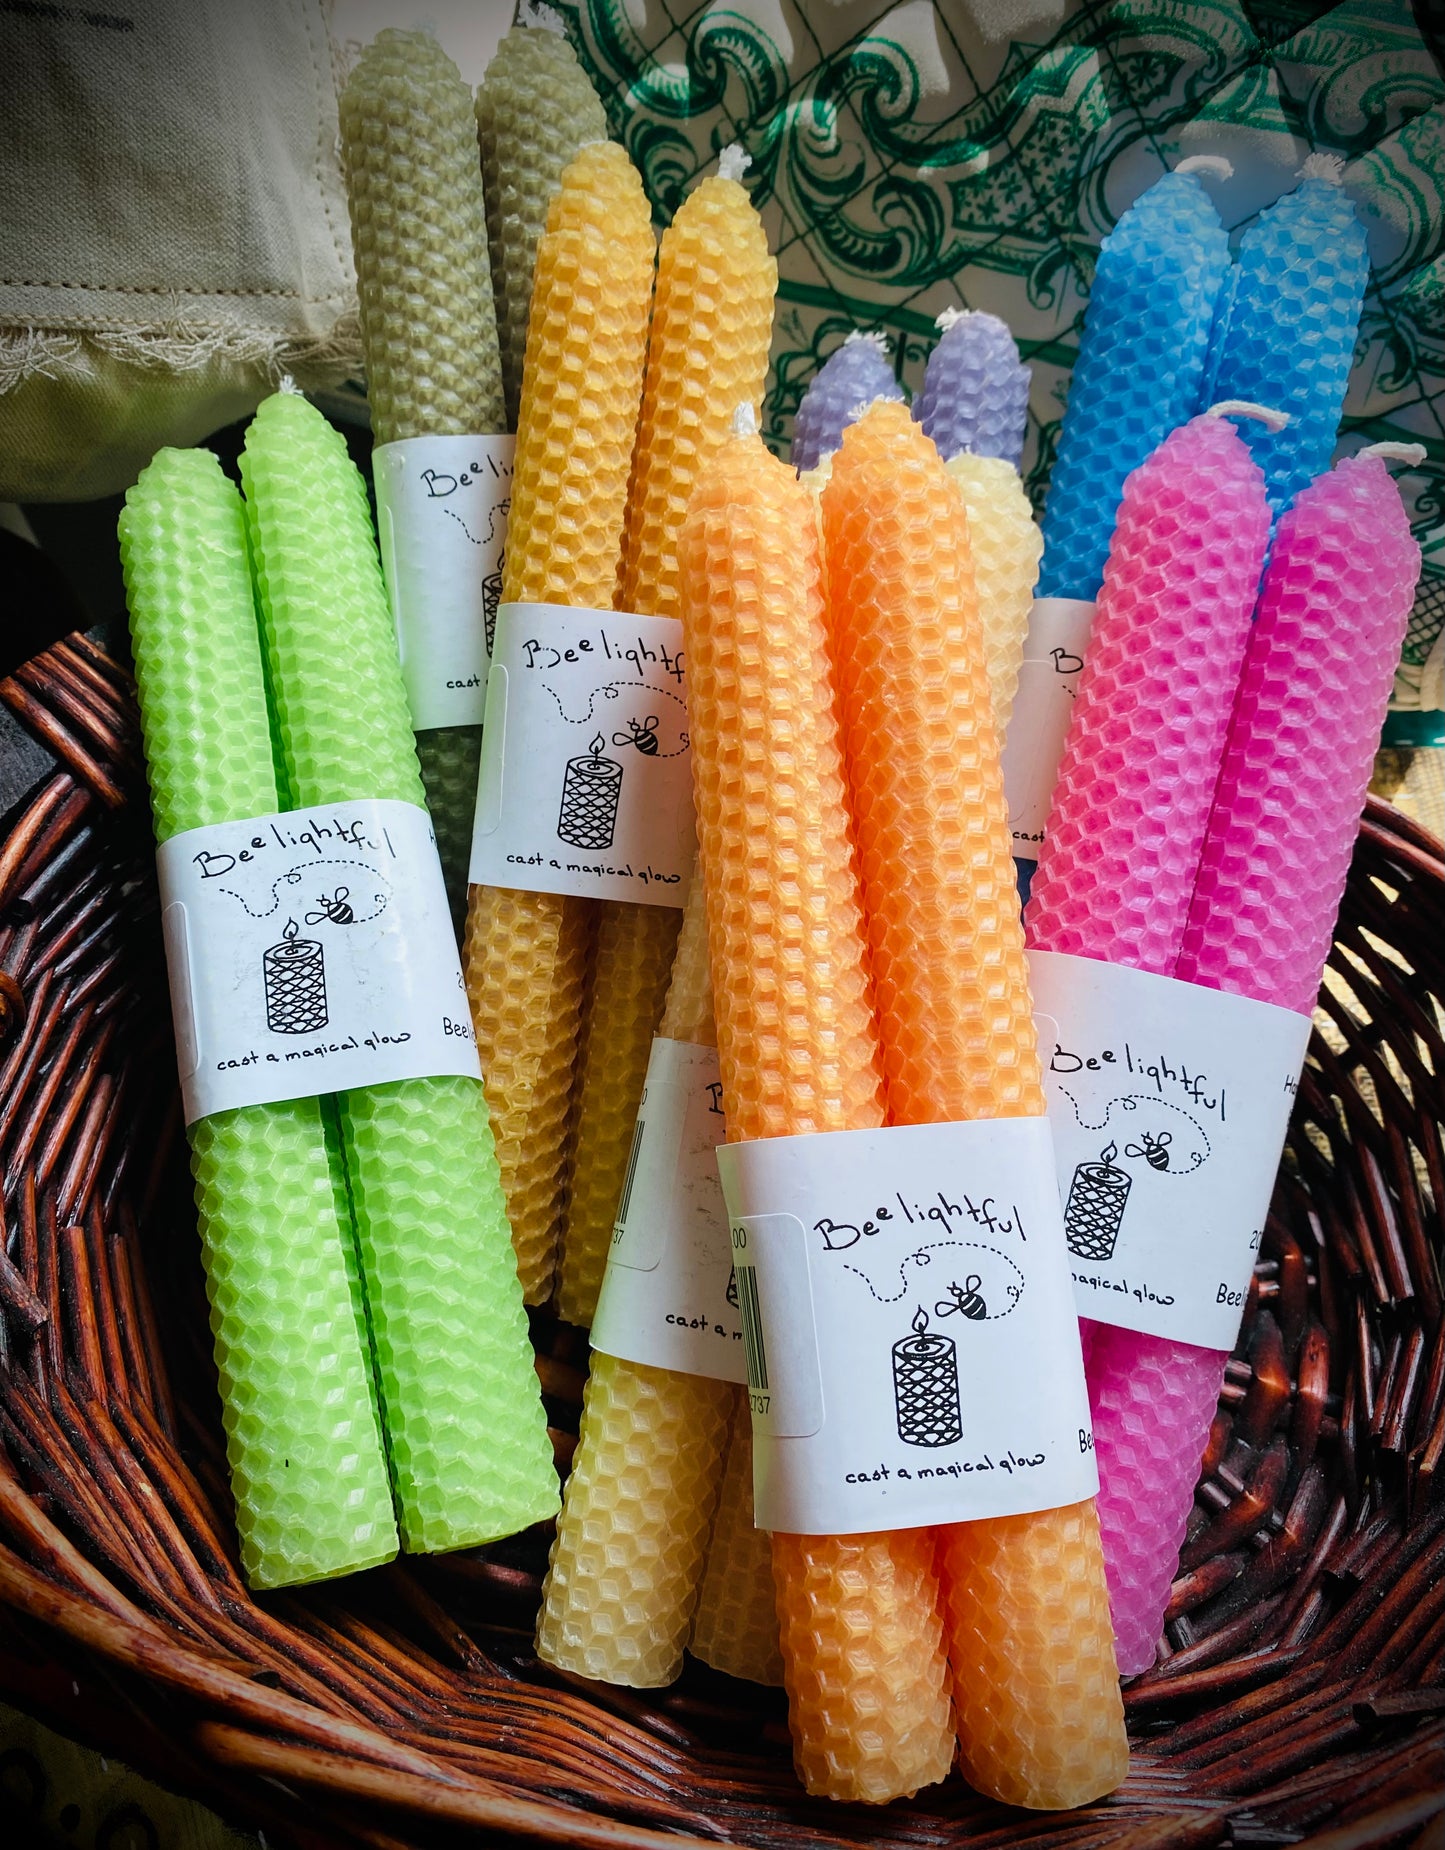 Locally Handmade 100% Pure Beeswax Candles